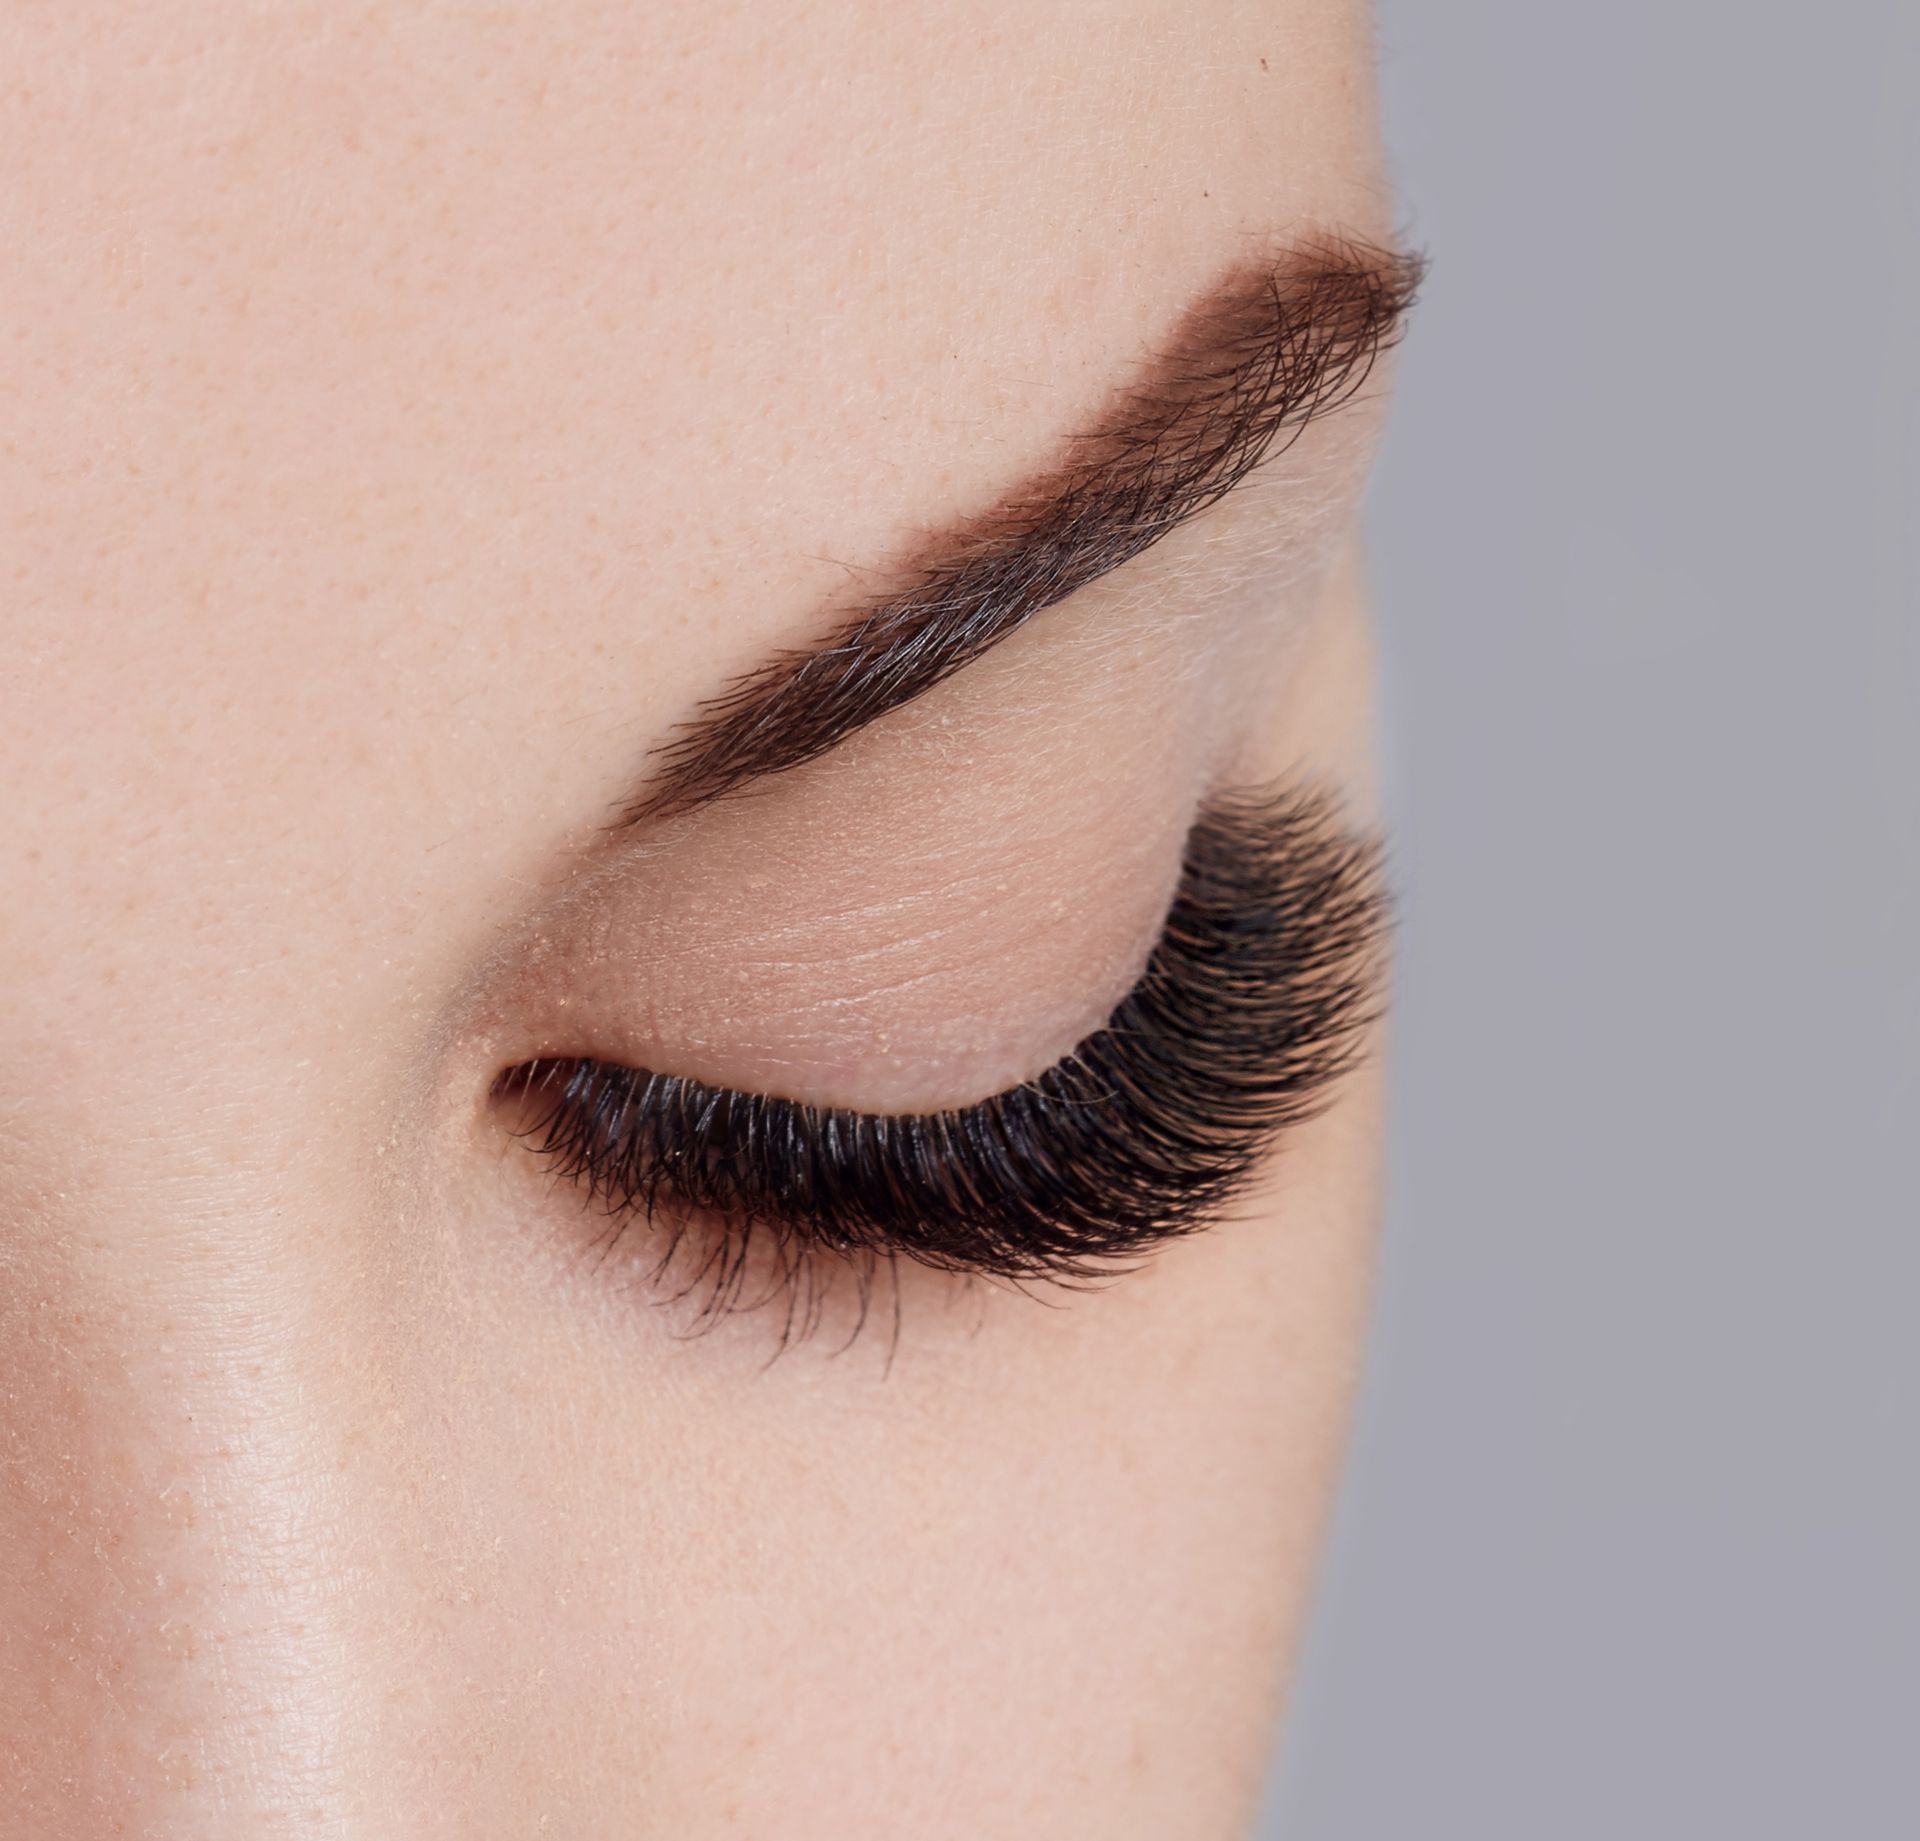 a close up of a woman 's eye with long eyelashes